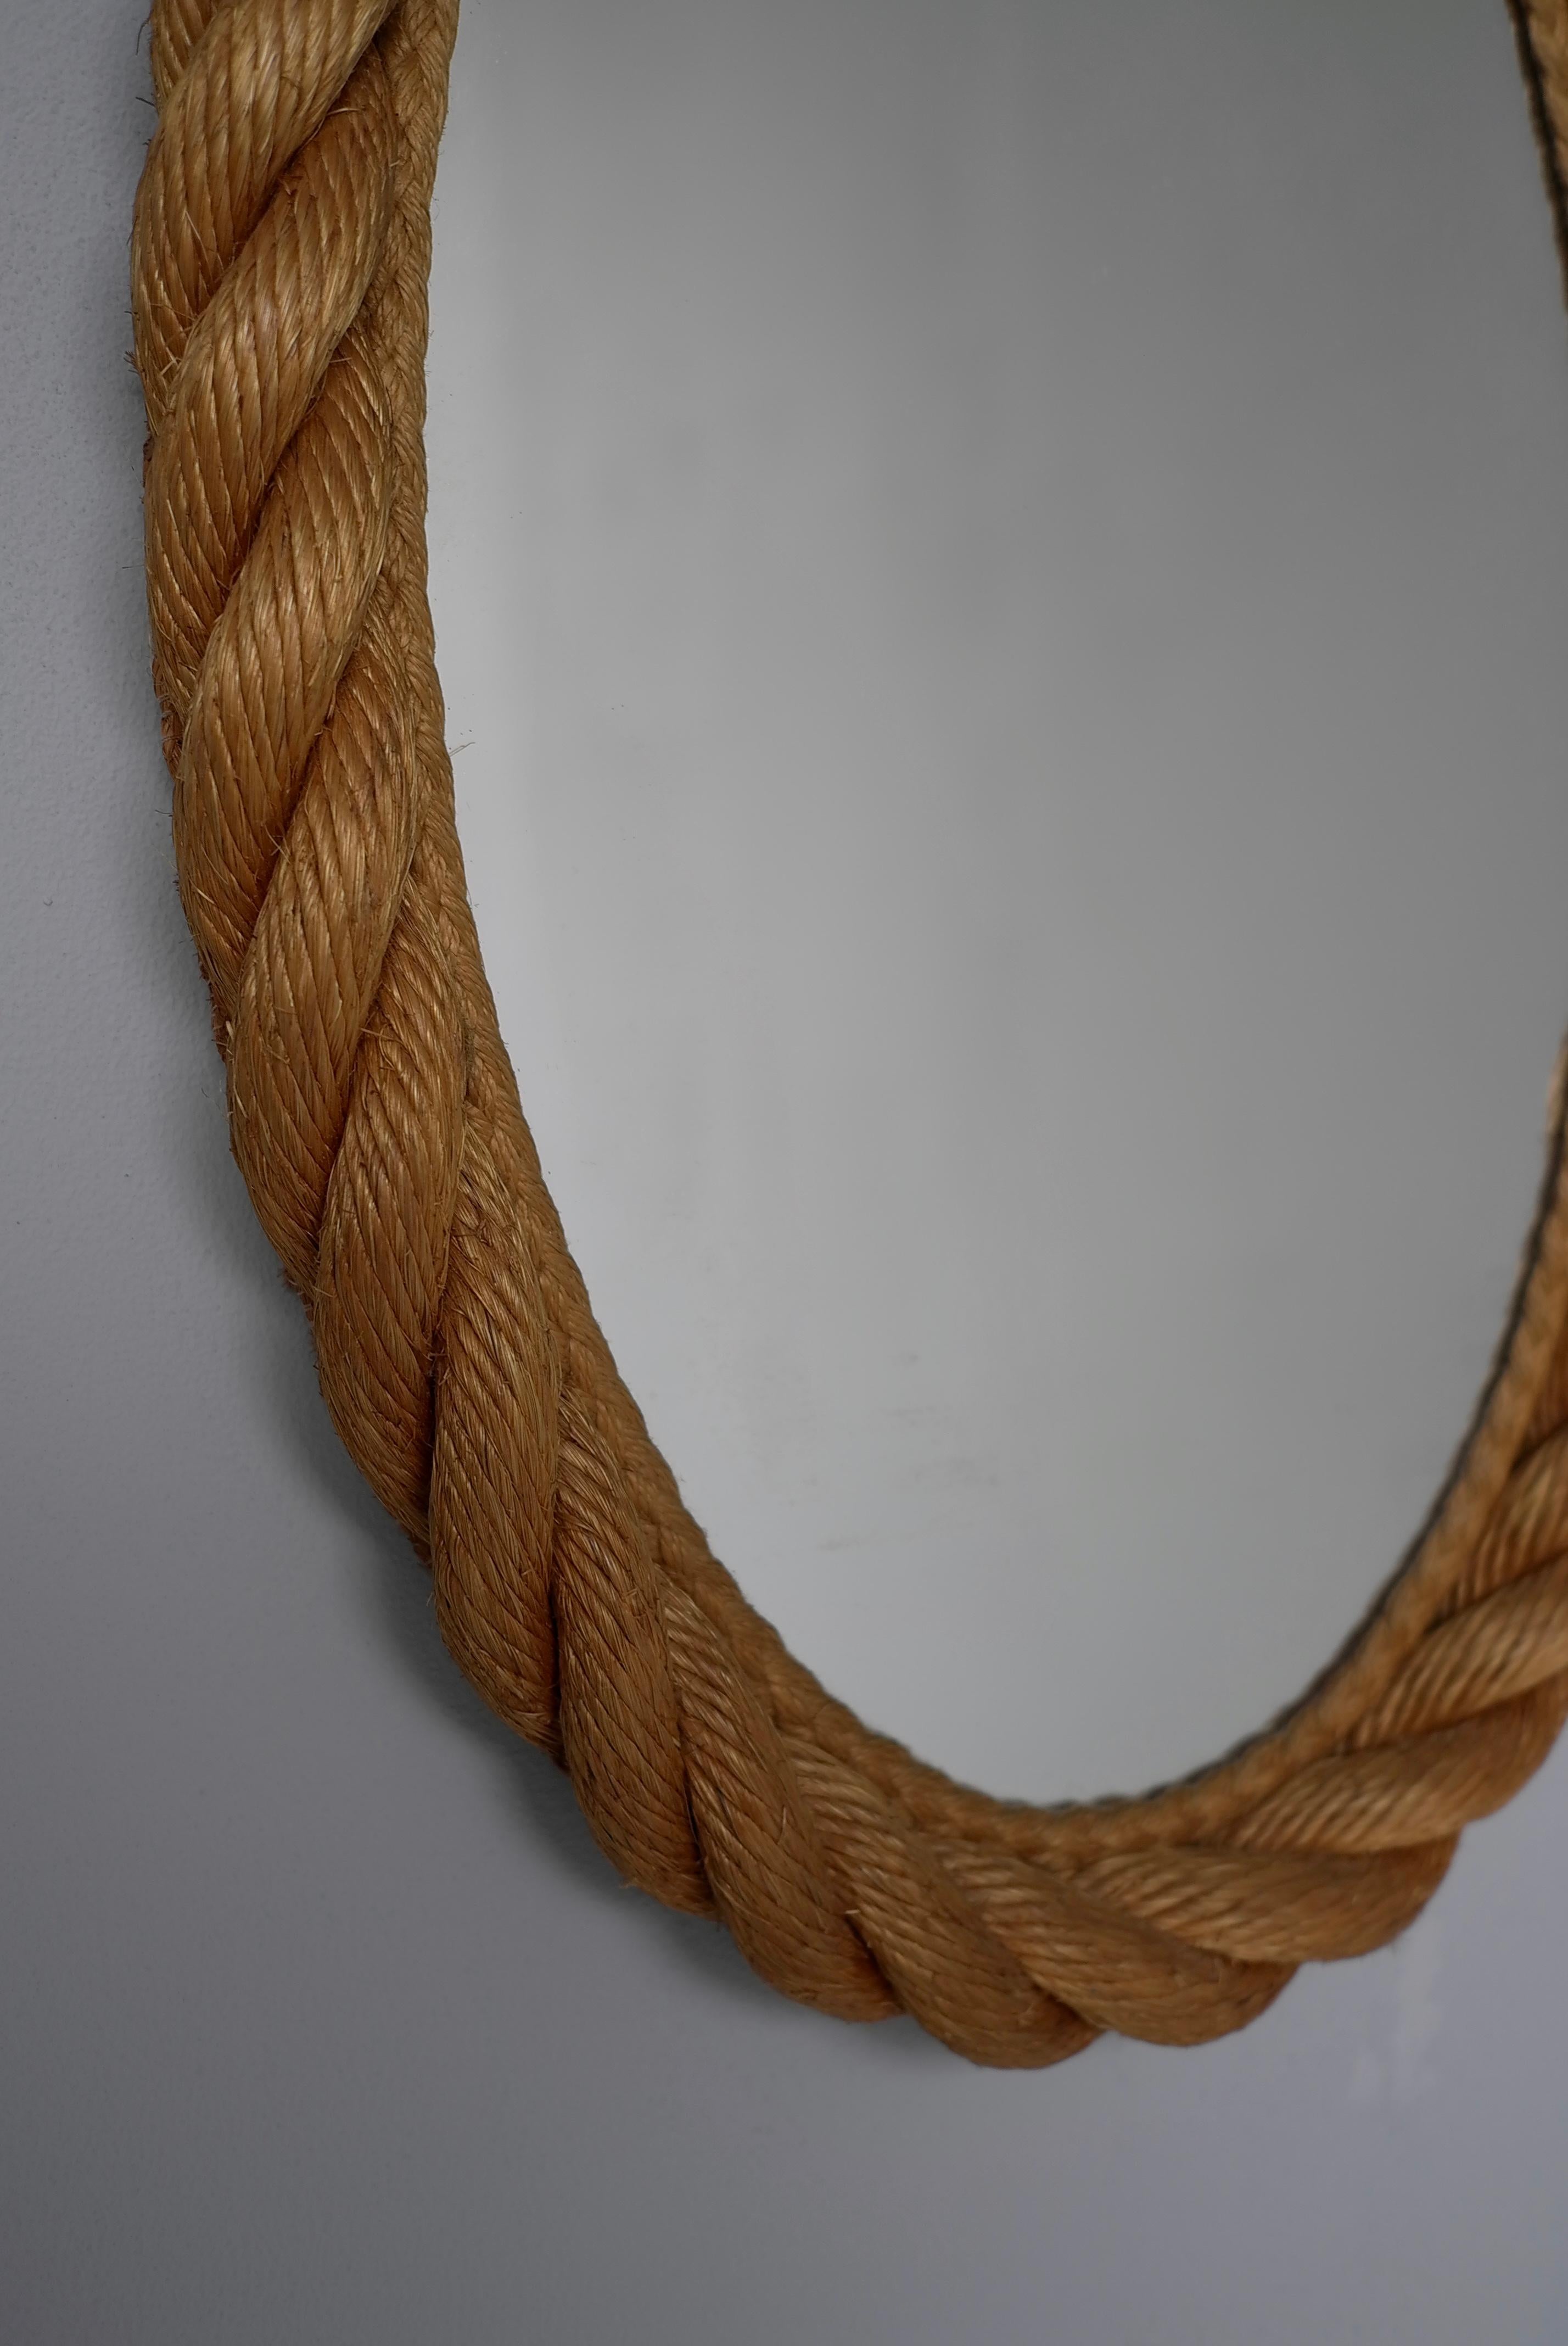 Oval Rope Mirror by Adrien Audoux and Frida Minet, France, 1950s For Sale 3